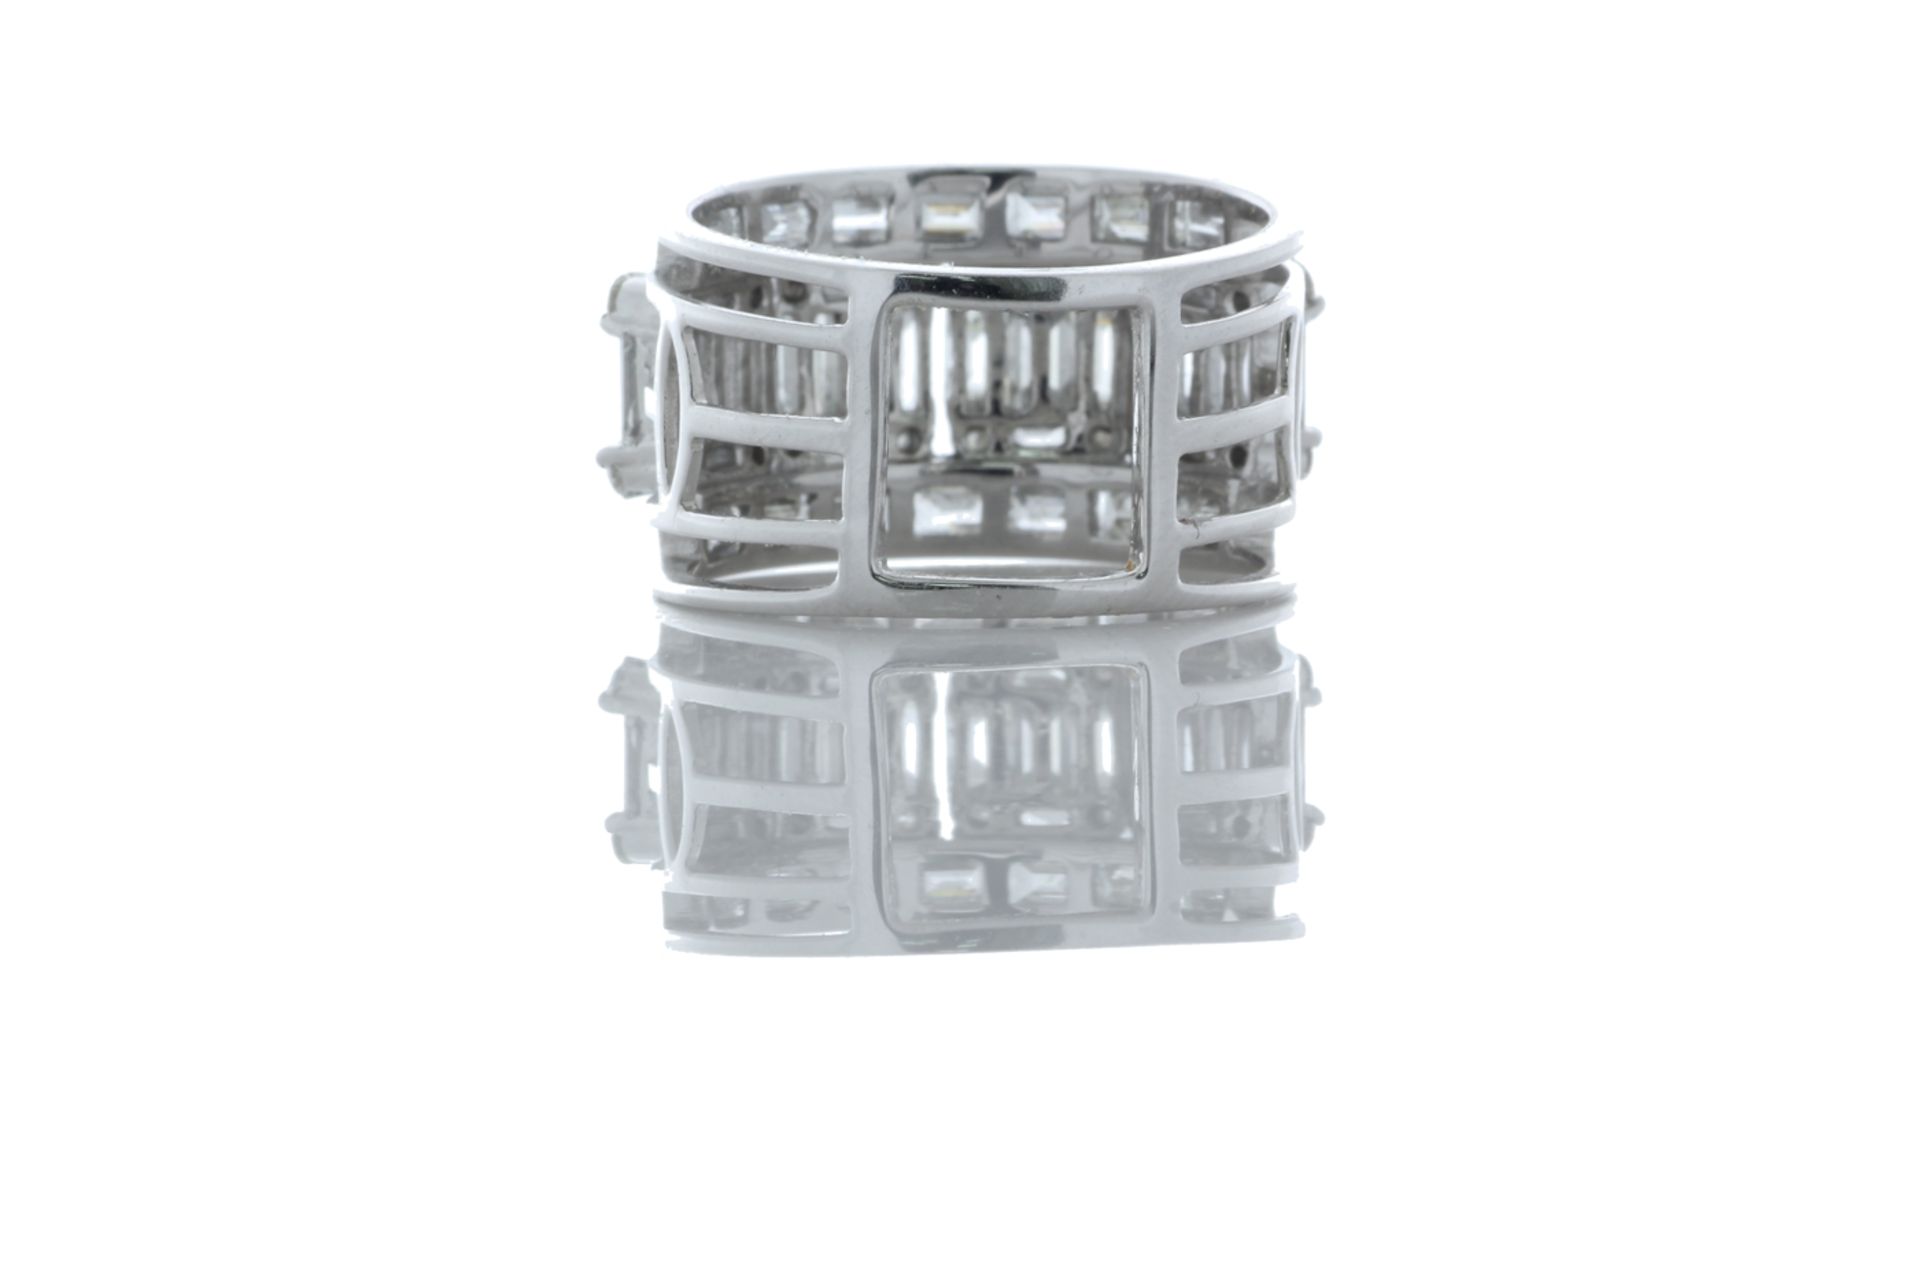 18ct White Gold Emerald Cut Eternity Diamond Ring 2.80 Carats - Valued By GIE £17,110.00 - This - Image 2 of 5